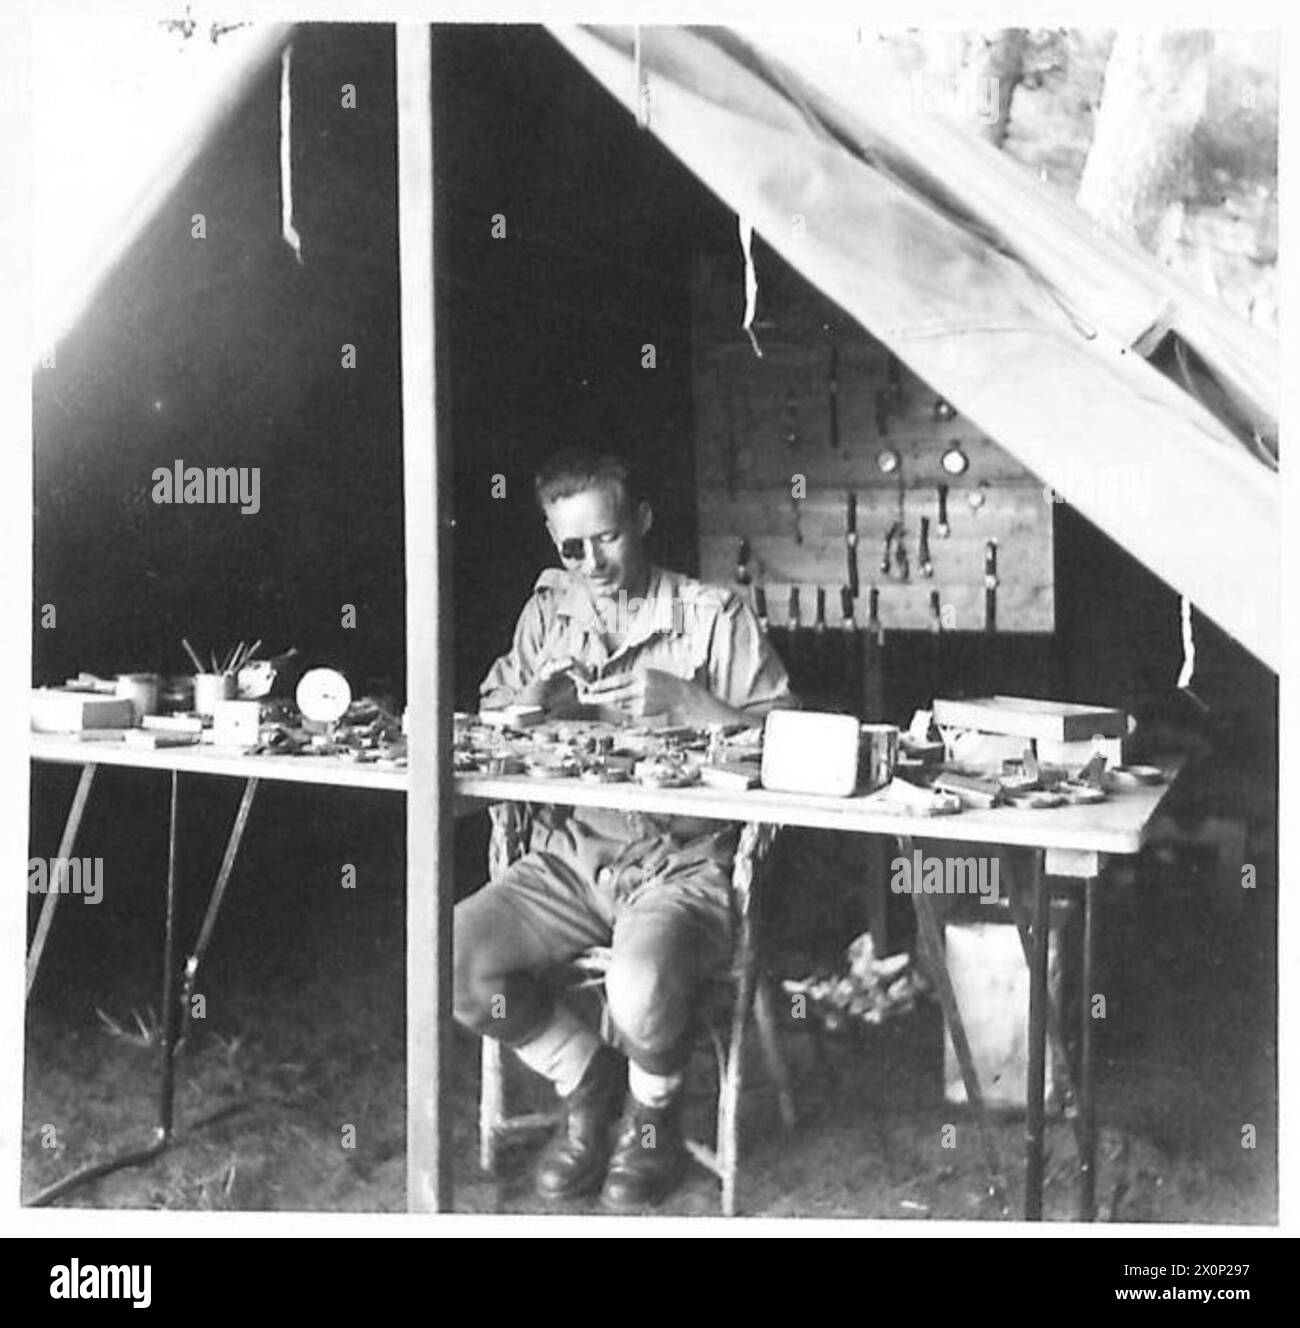 CONVALESCENT HOME IN NORTH AFRICA - Pte. F.G. Austine, 10 Royal Berkshire Regiment, of 41 Grenville Road, Hornsey Rise, Upper Holloway, N.19. Pte. Austine is the camp's watchmaker, who despite a crippled right hand caused by a shell splinter in Sicily, carried on his intricate work with skill. Photographic negative , British Army Stock Photo